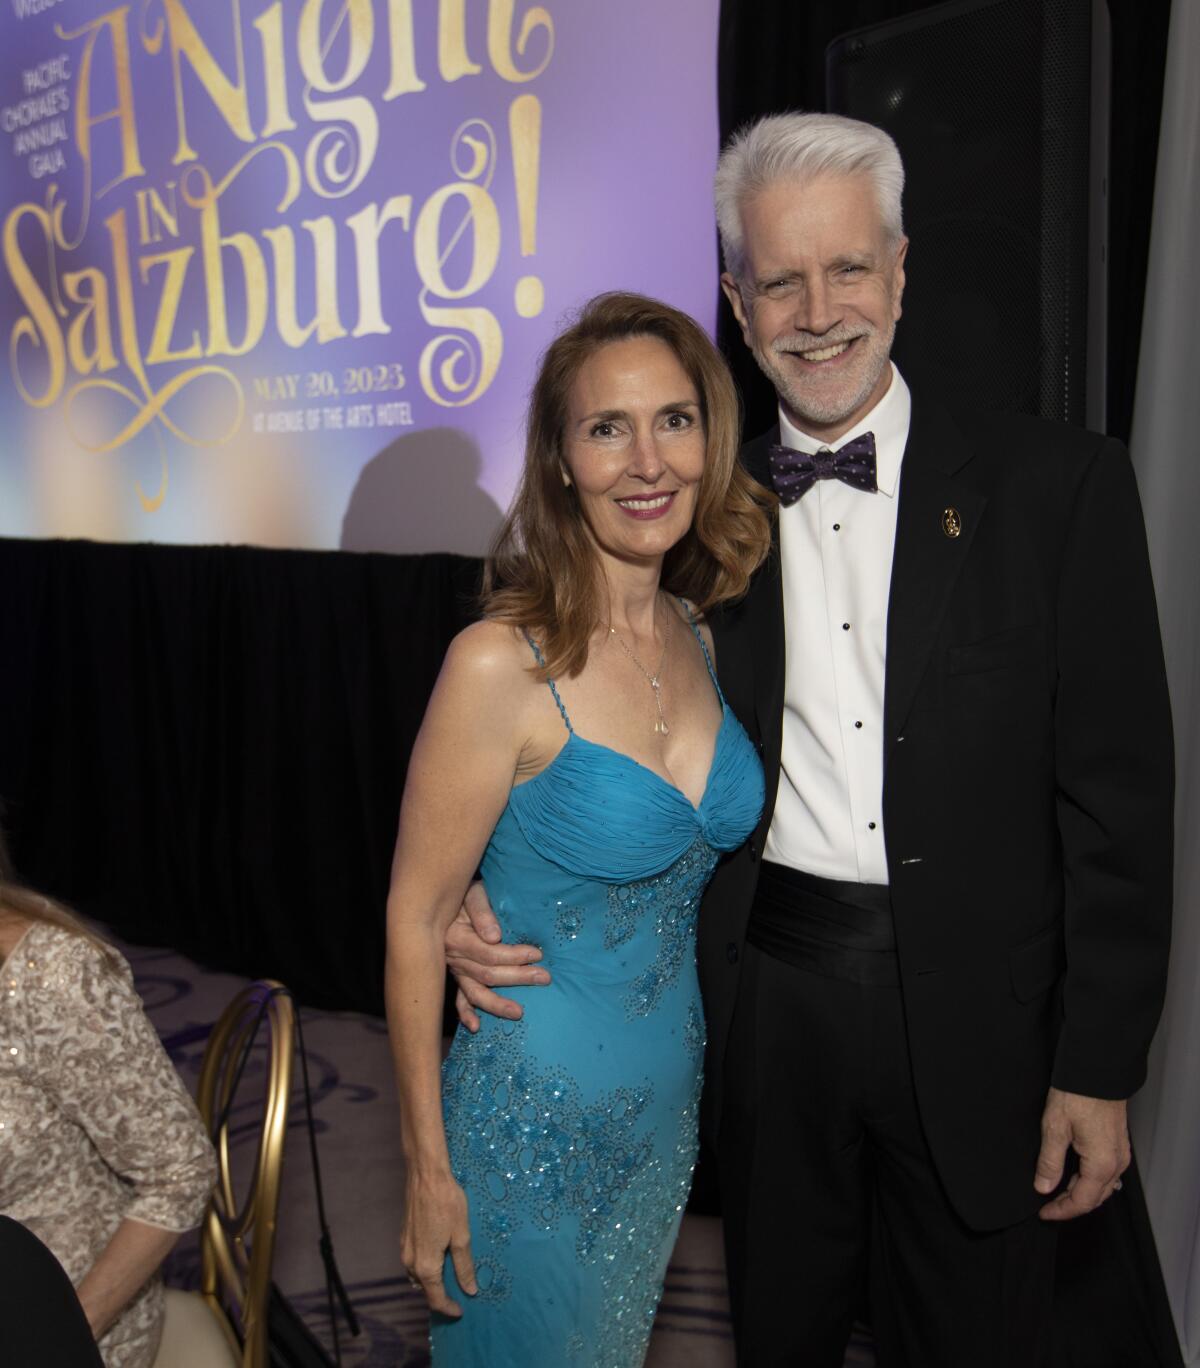 Pacific Chorale Gala Chair Susan Lindley and Chris Lindley at the "A Night in Salzburg" gala May 20.